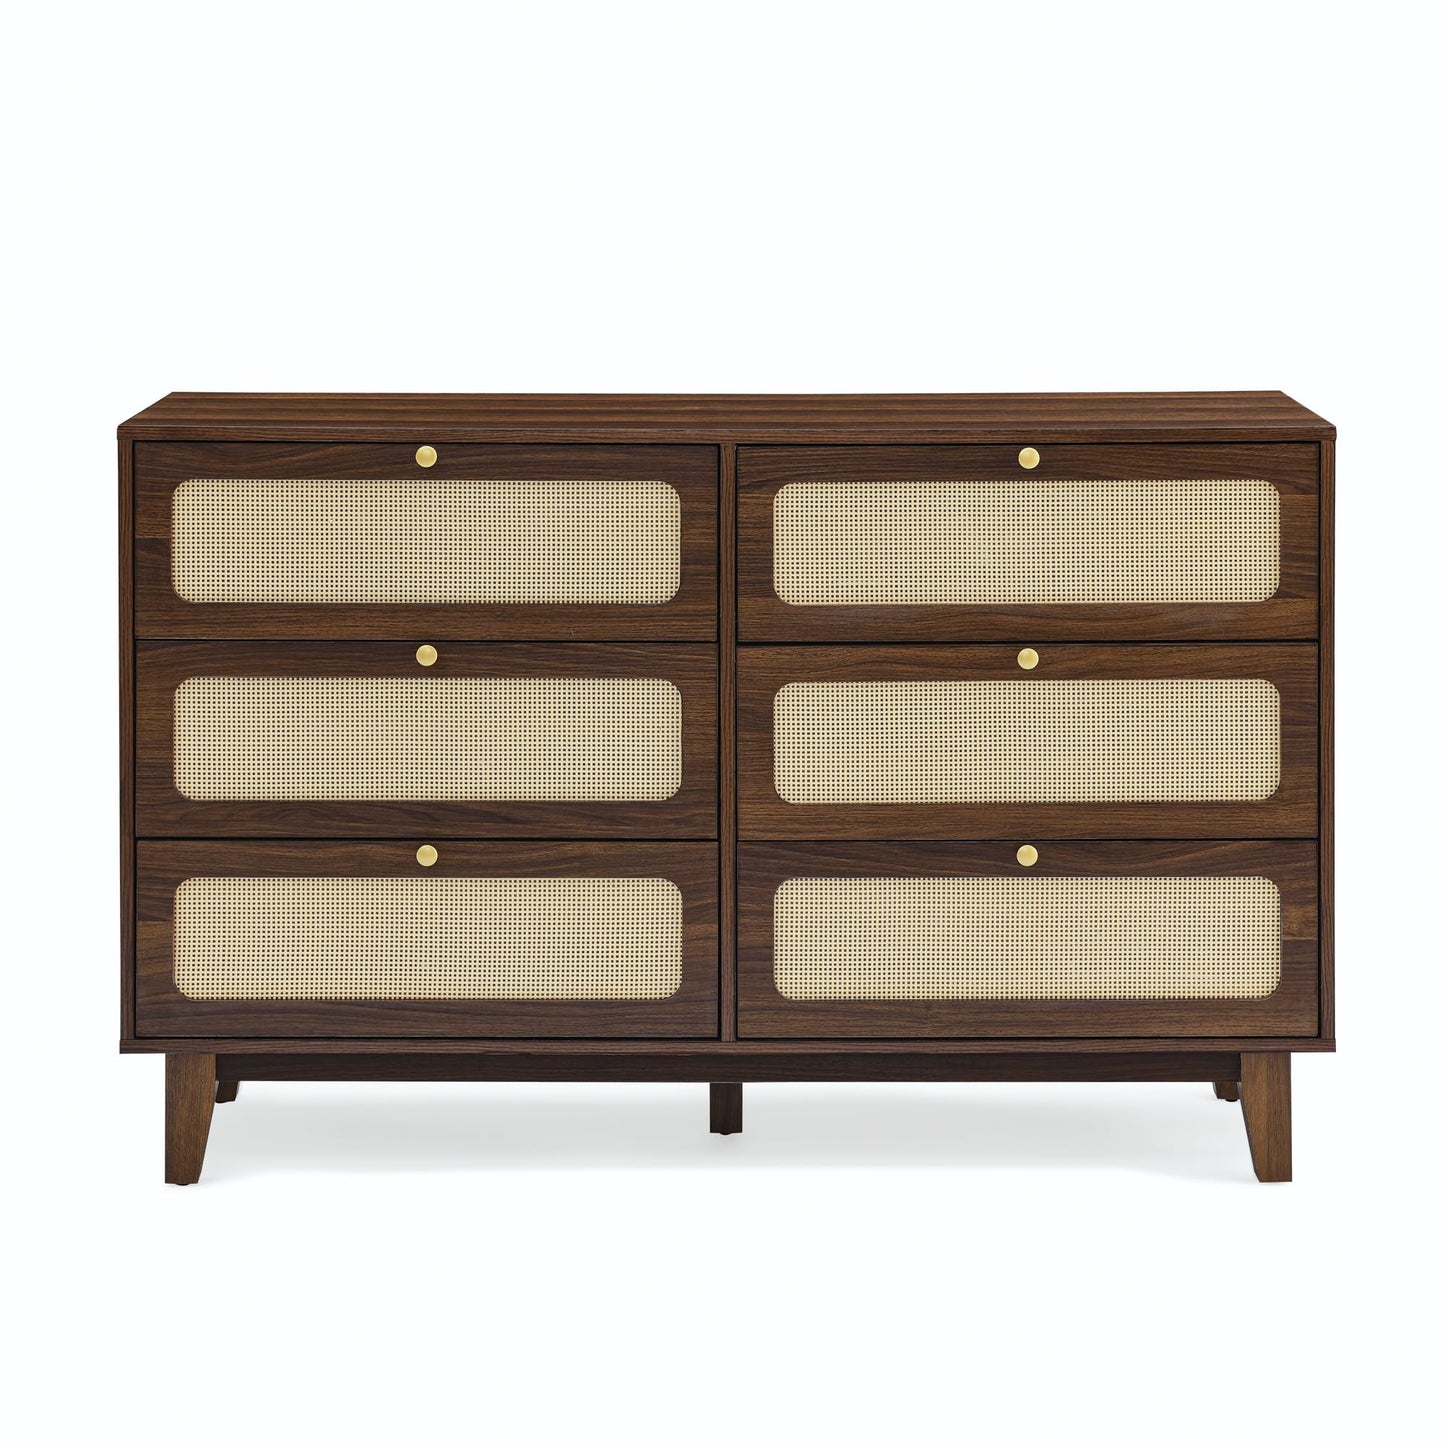 6 Drawer Rattan Dresser,Modern Chest with 6 Drawers, Wood Storage Cabinet Sideboard TV Cabinet for Bedroom, Living Room, Entryway, Hallway(Natural Walnut)